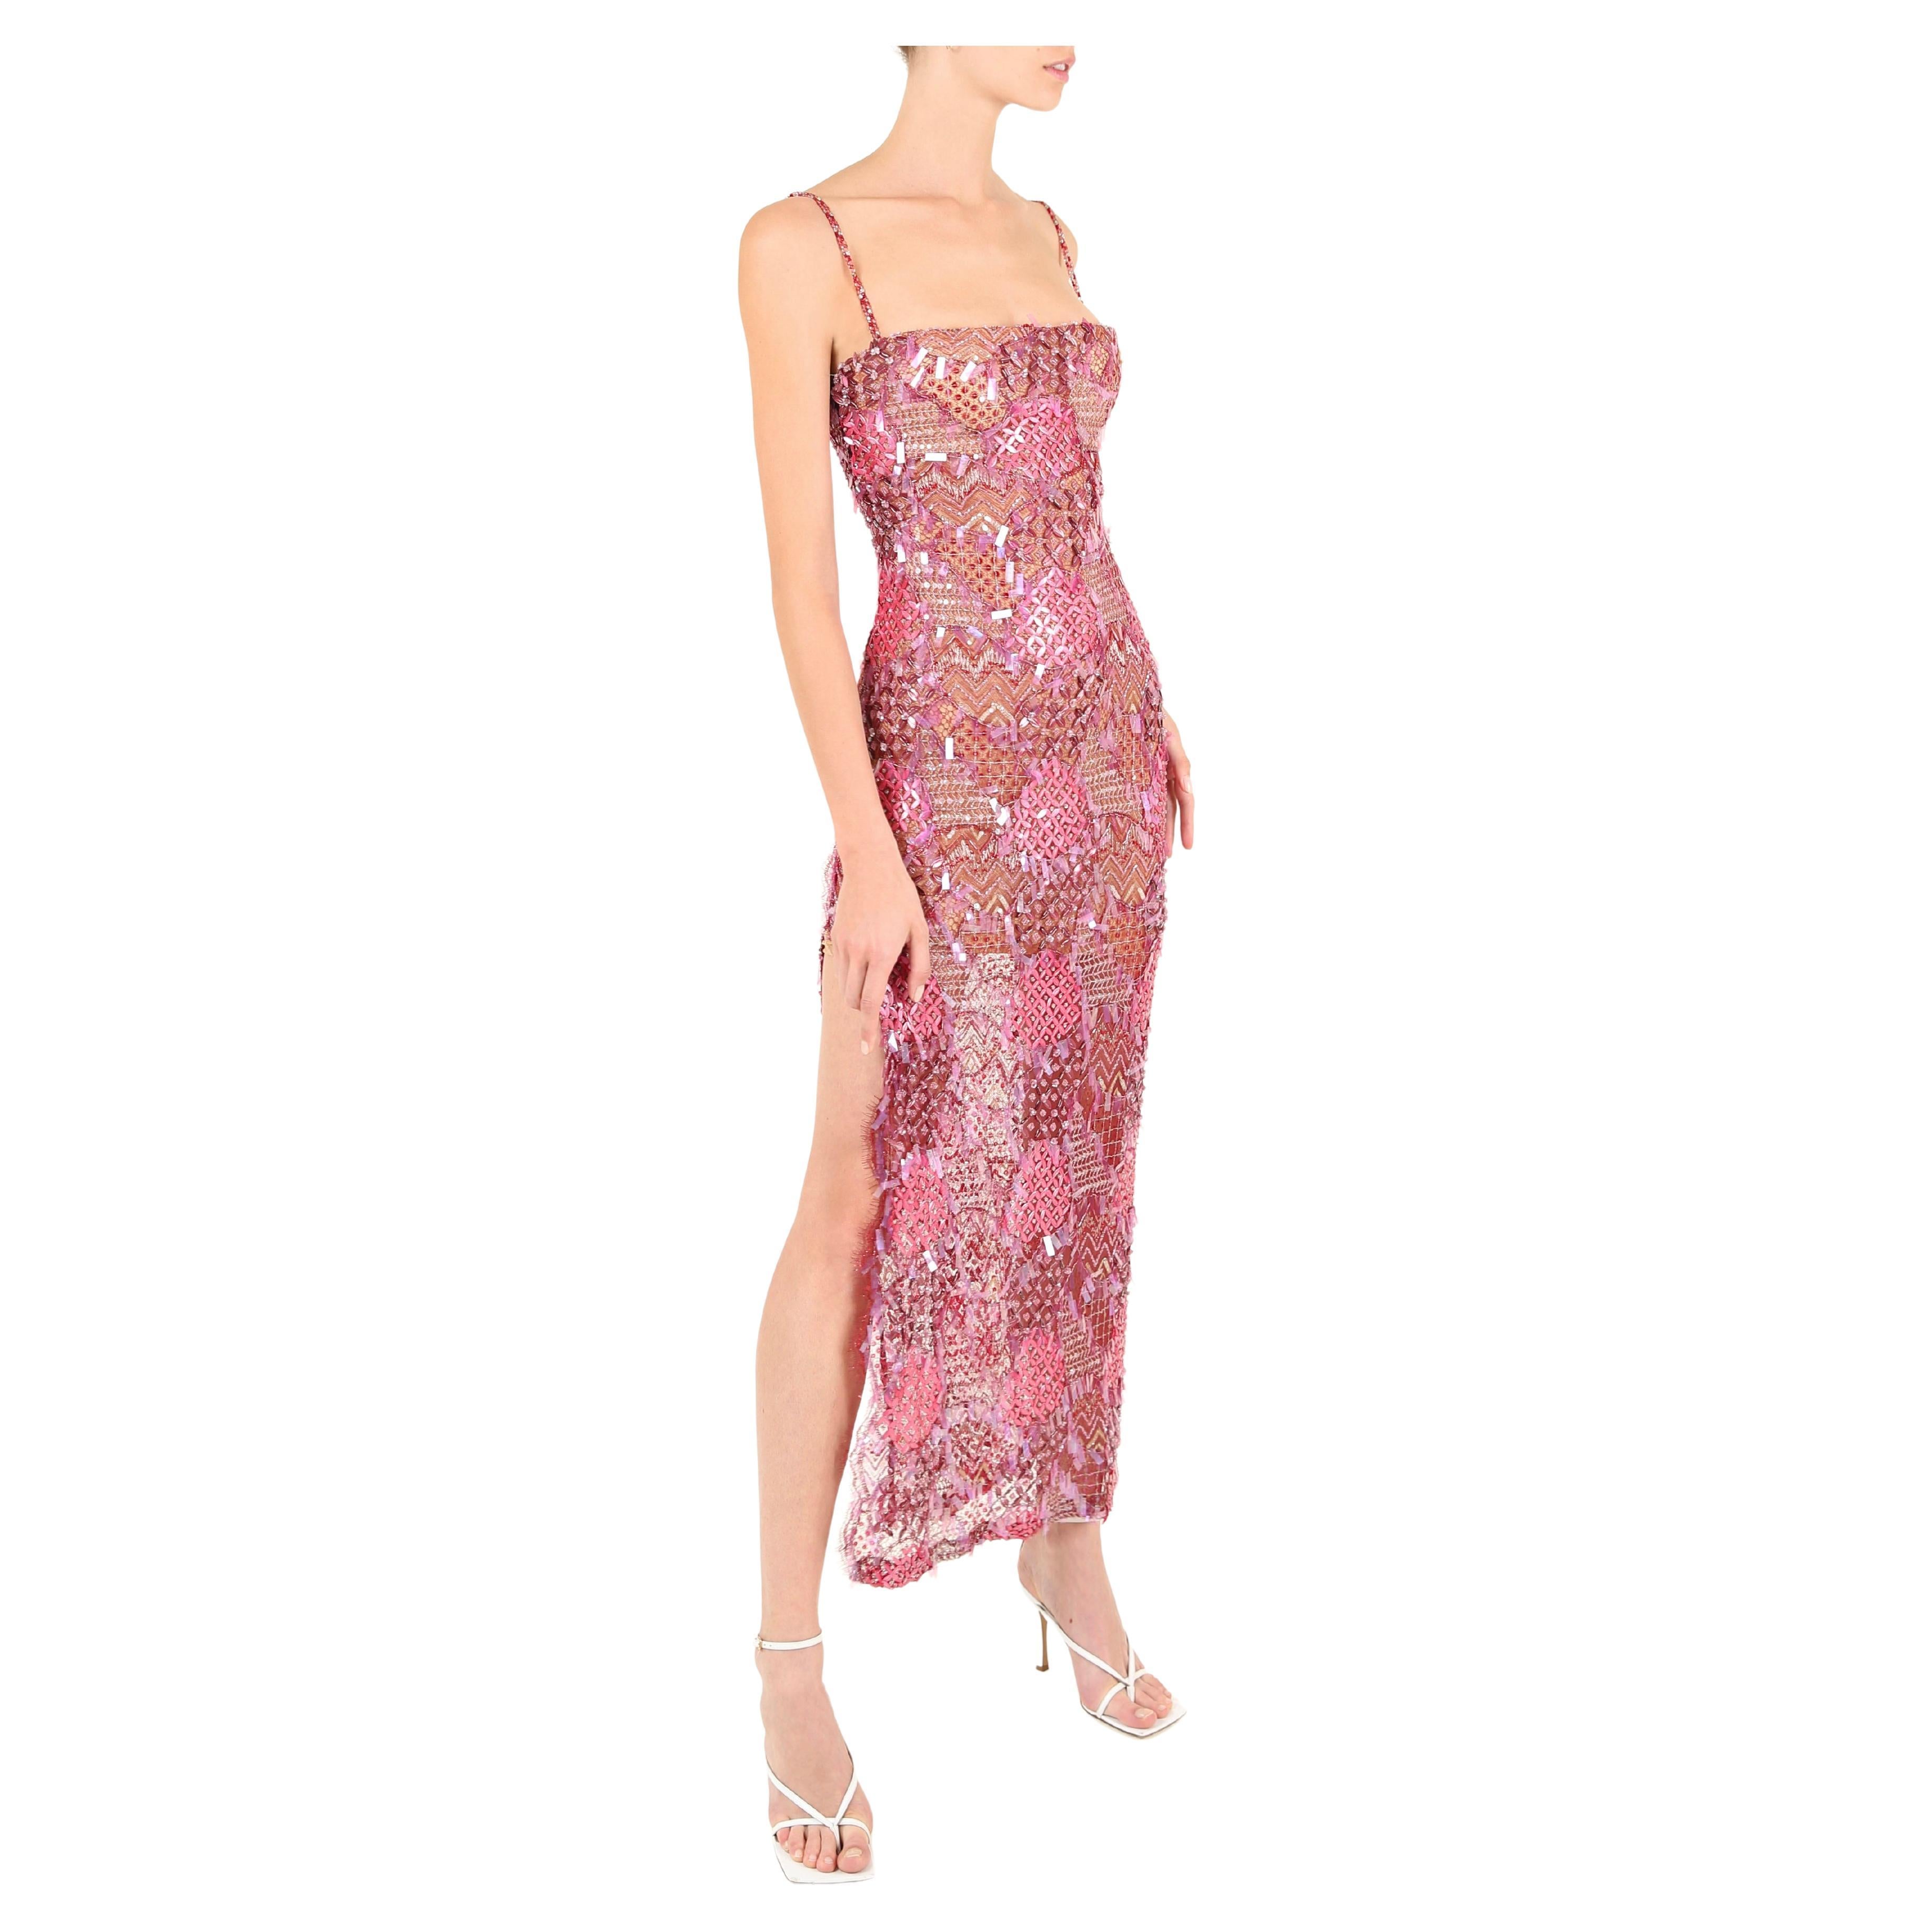 Loris Azzaro couture pink embellished sequin beaded sheer slit bustier dress XS For Sale